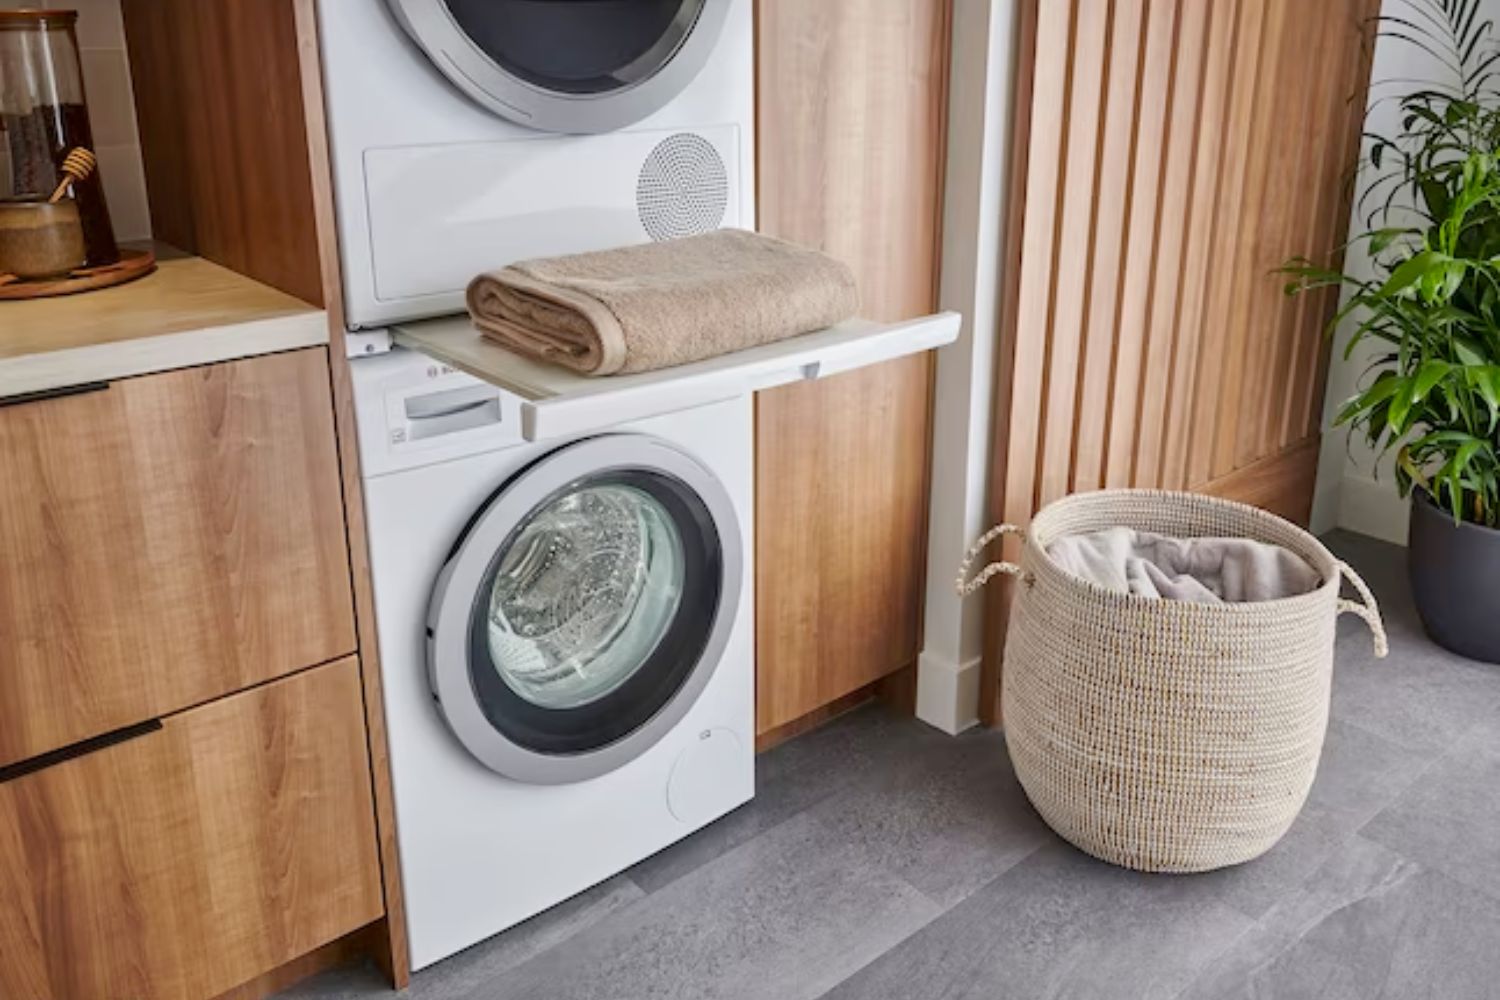 The best heat pump dryer installed in a wall of cabinetry in a modern living space.